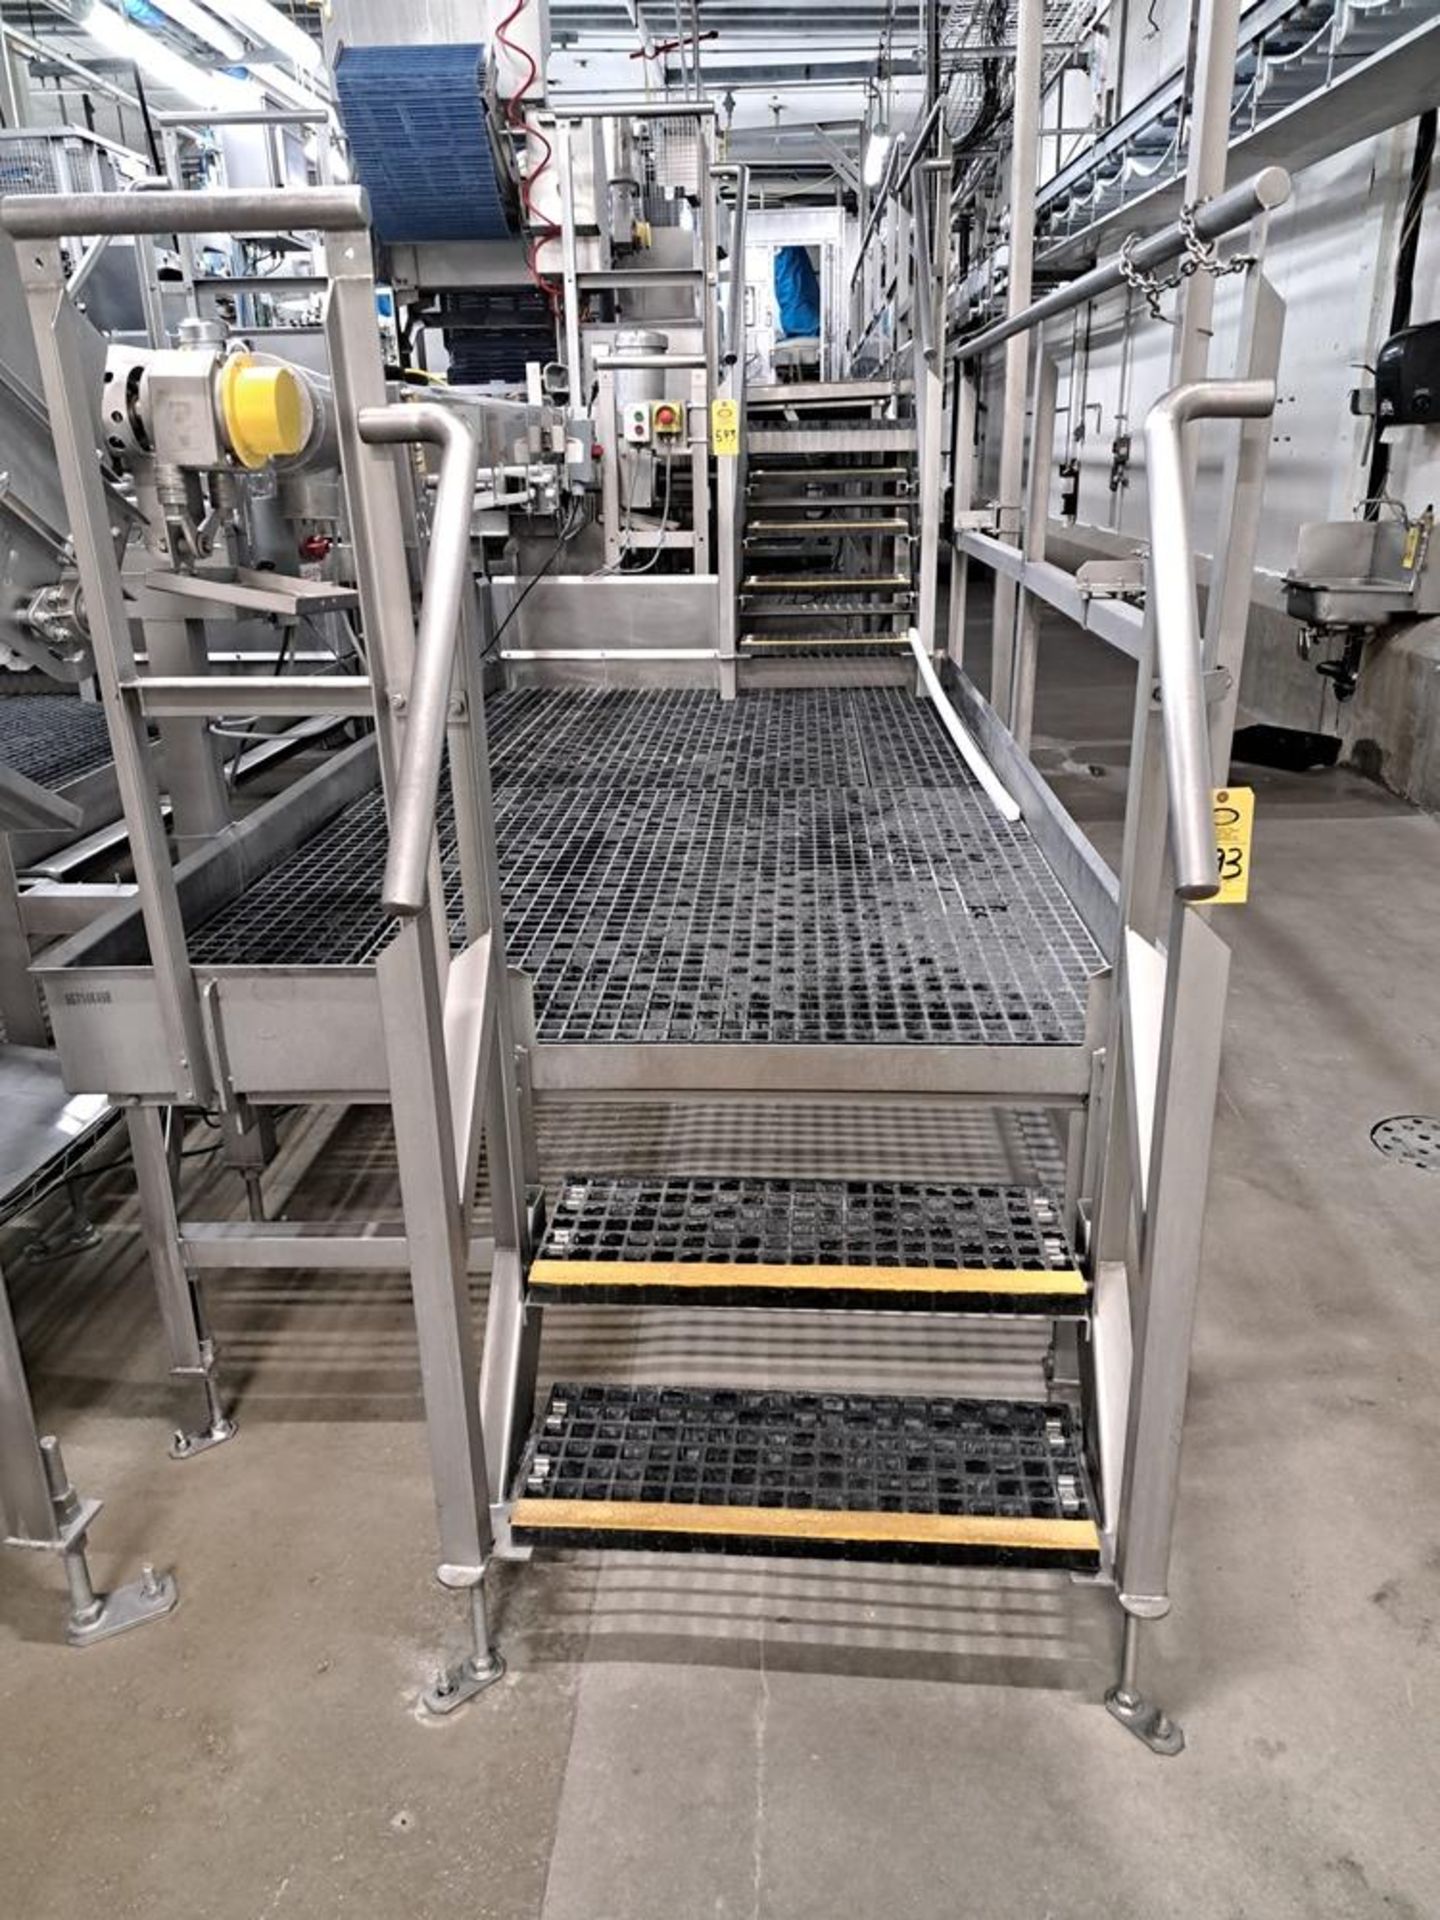 Stainless Steel Platform, 4' W X 10' L, chemgrate flooring, with stairs, 16" L with stairs: Required